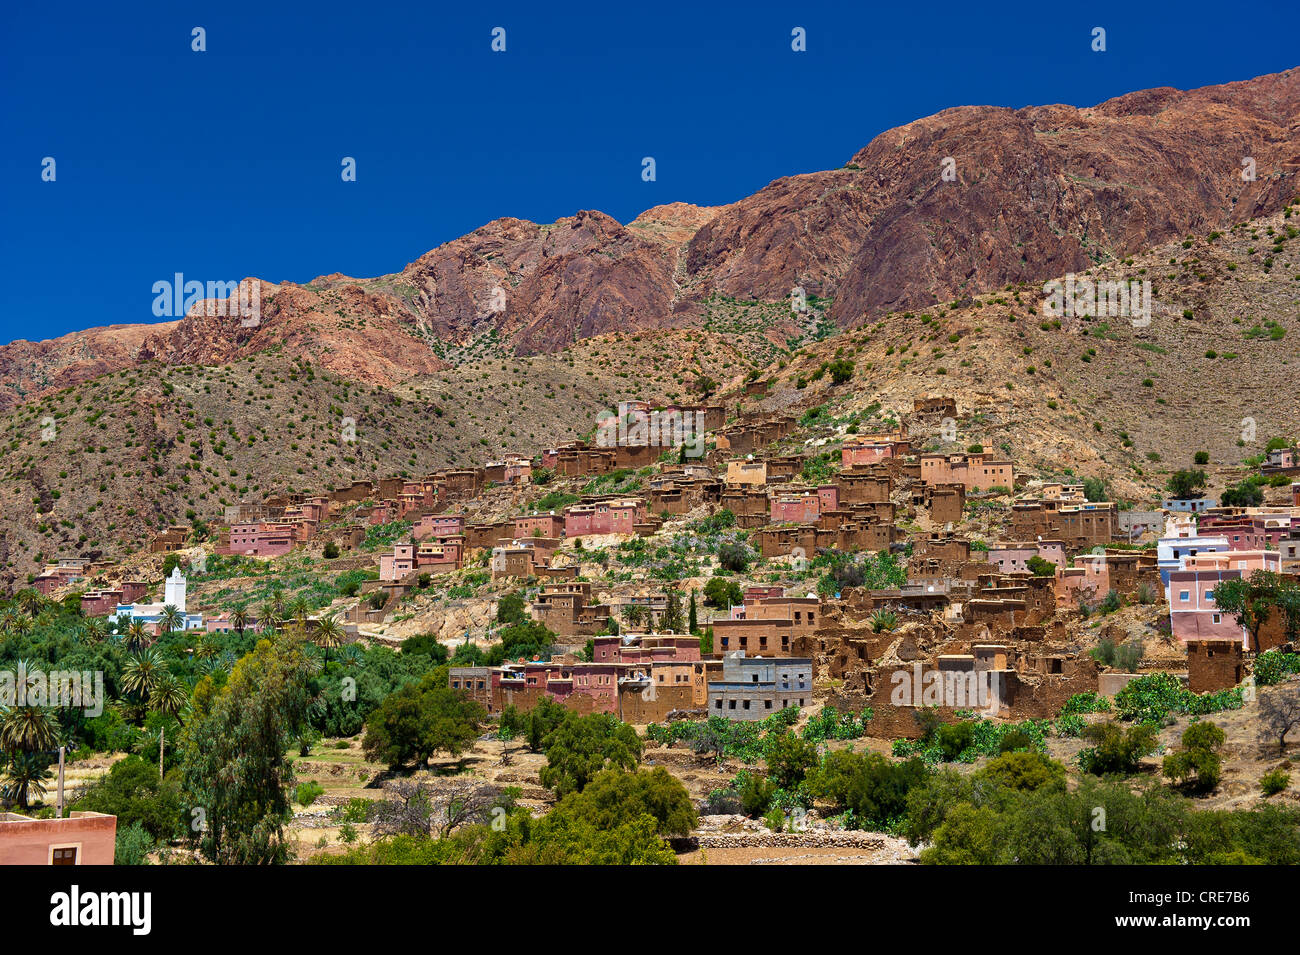 Typical mountain scenery in the Anti Atlas Mountains with a village with a mosque on a hill, Anti-Atlas Mountains Stock Photo